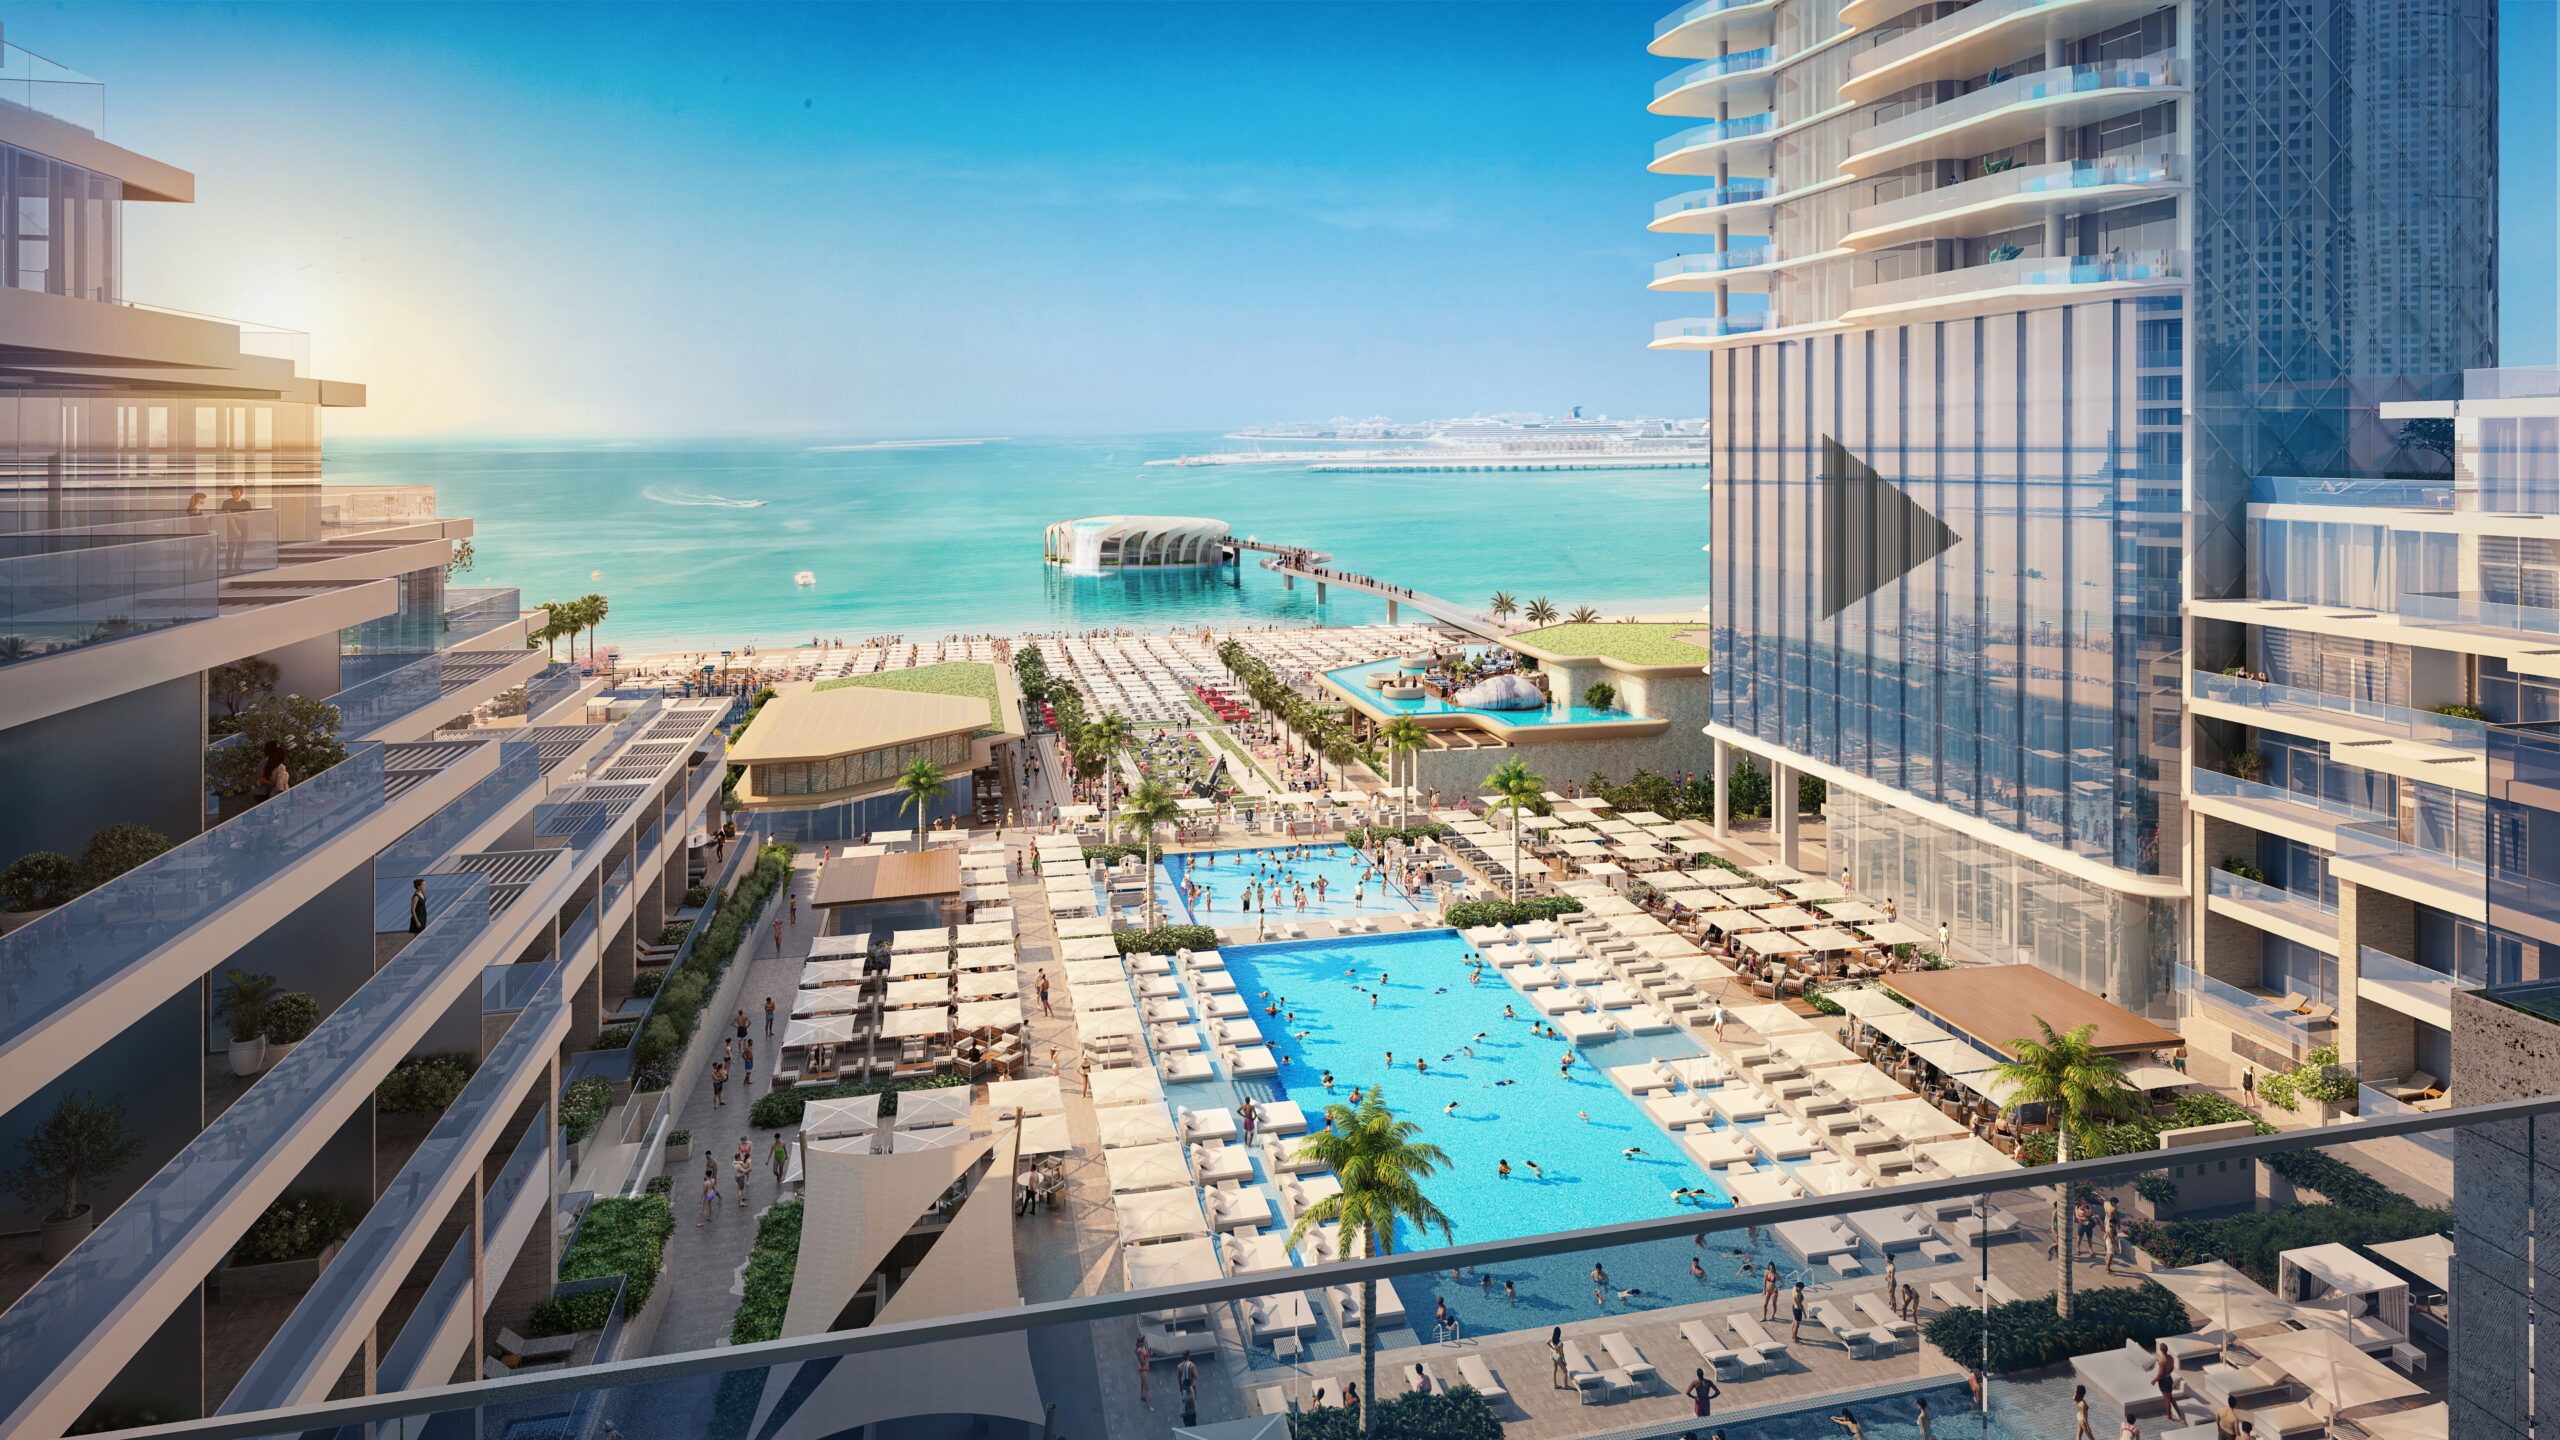 FIVE LUXE set to open up on 31 March as Dubai’s hottest new beach front property